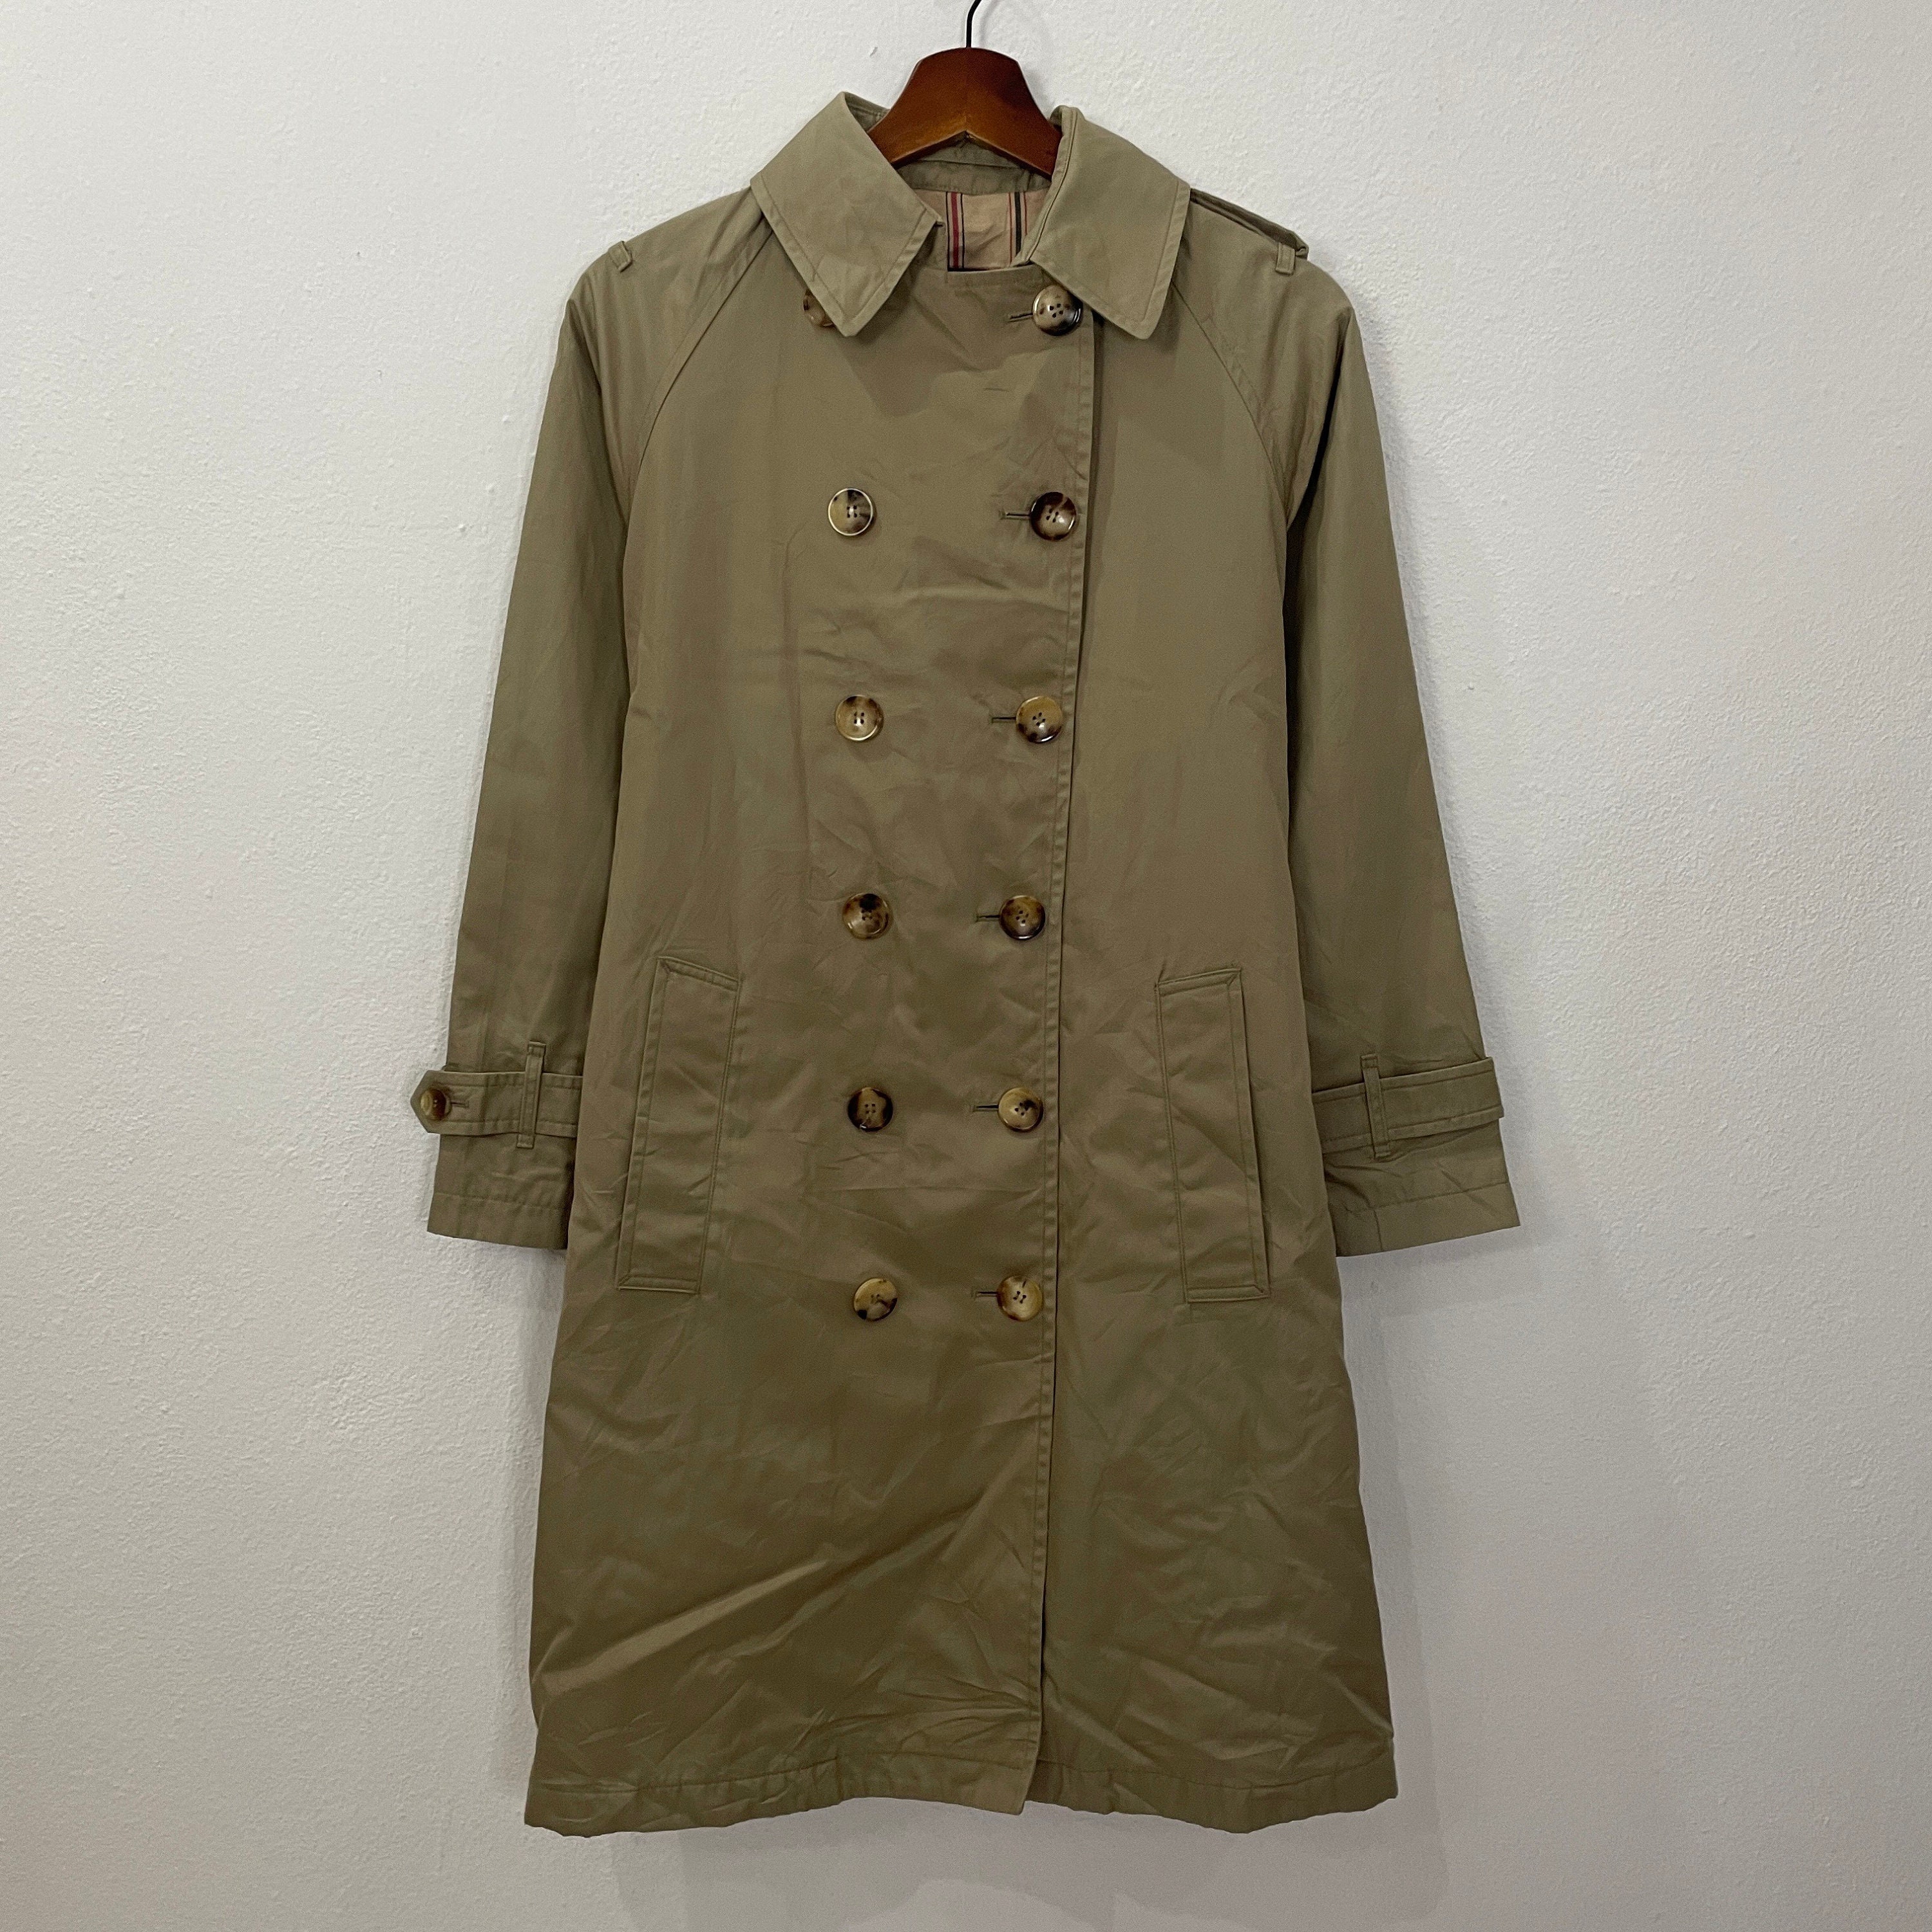 Grenfell Trench - Etsy